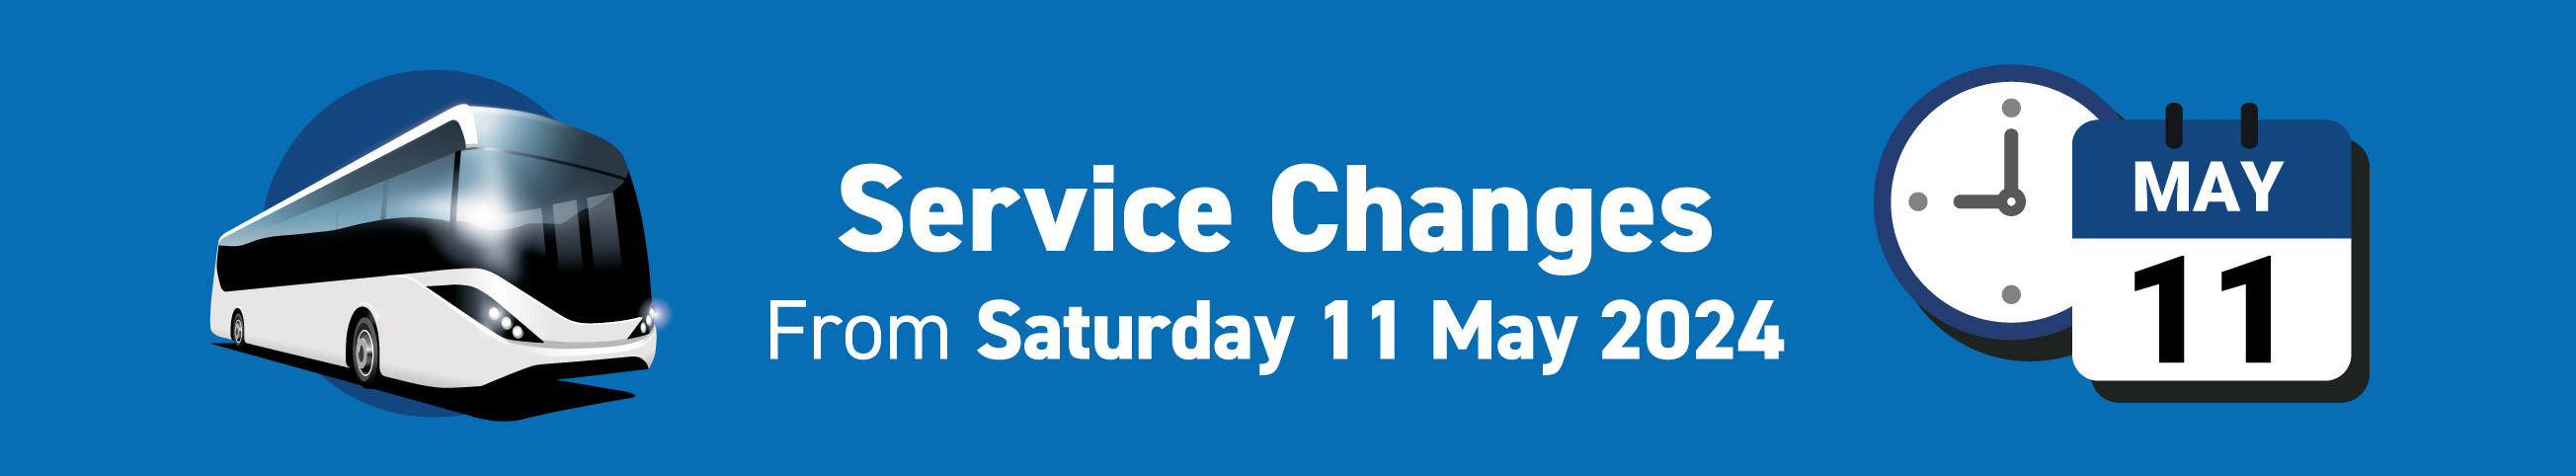 Service changes from Saturday 11 May 2024